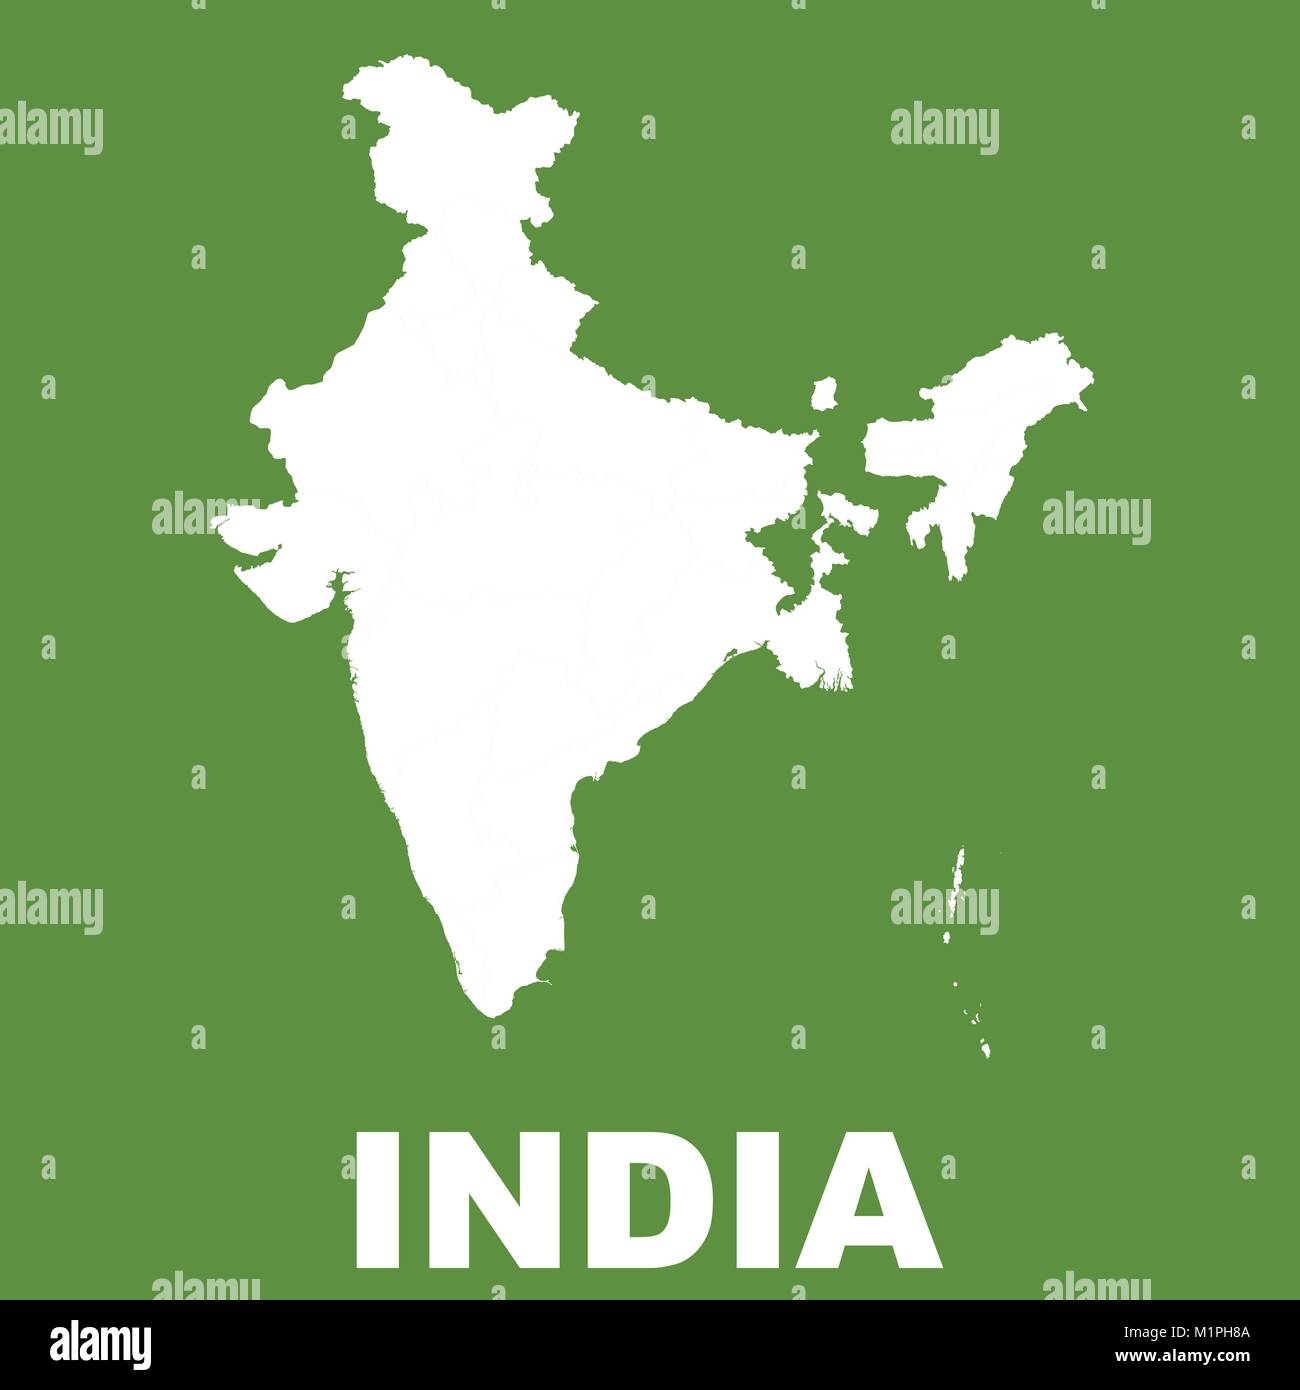 India Map on Green Background. Flat vector Stock Vector